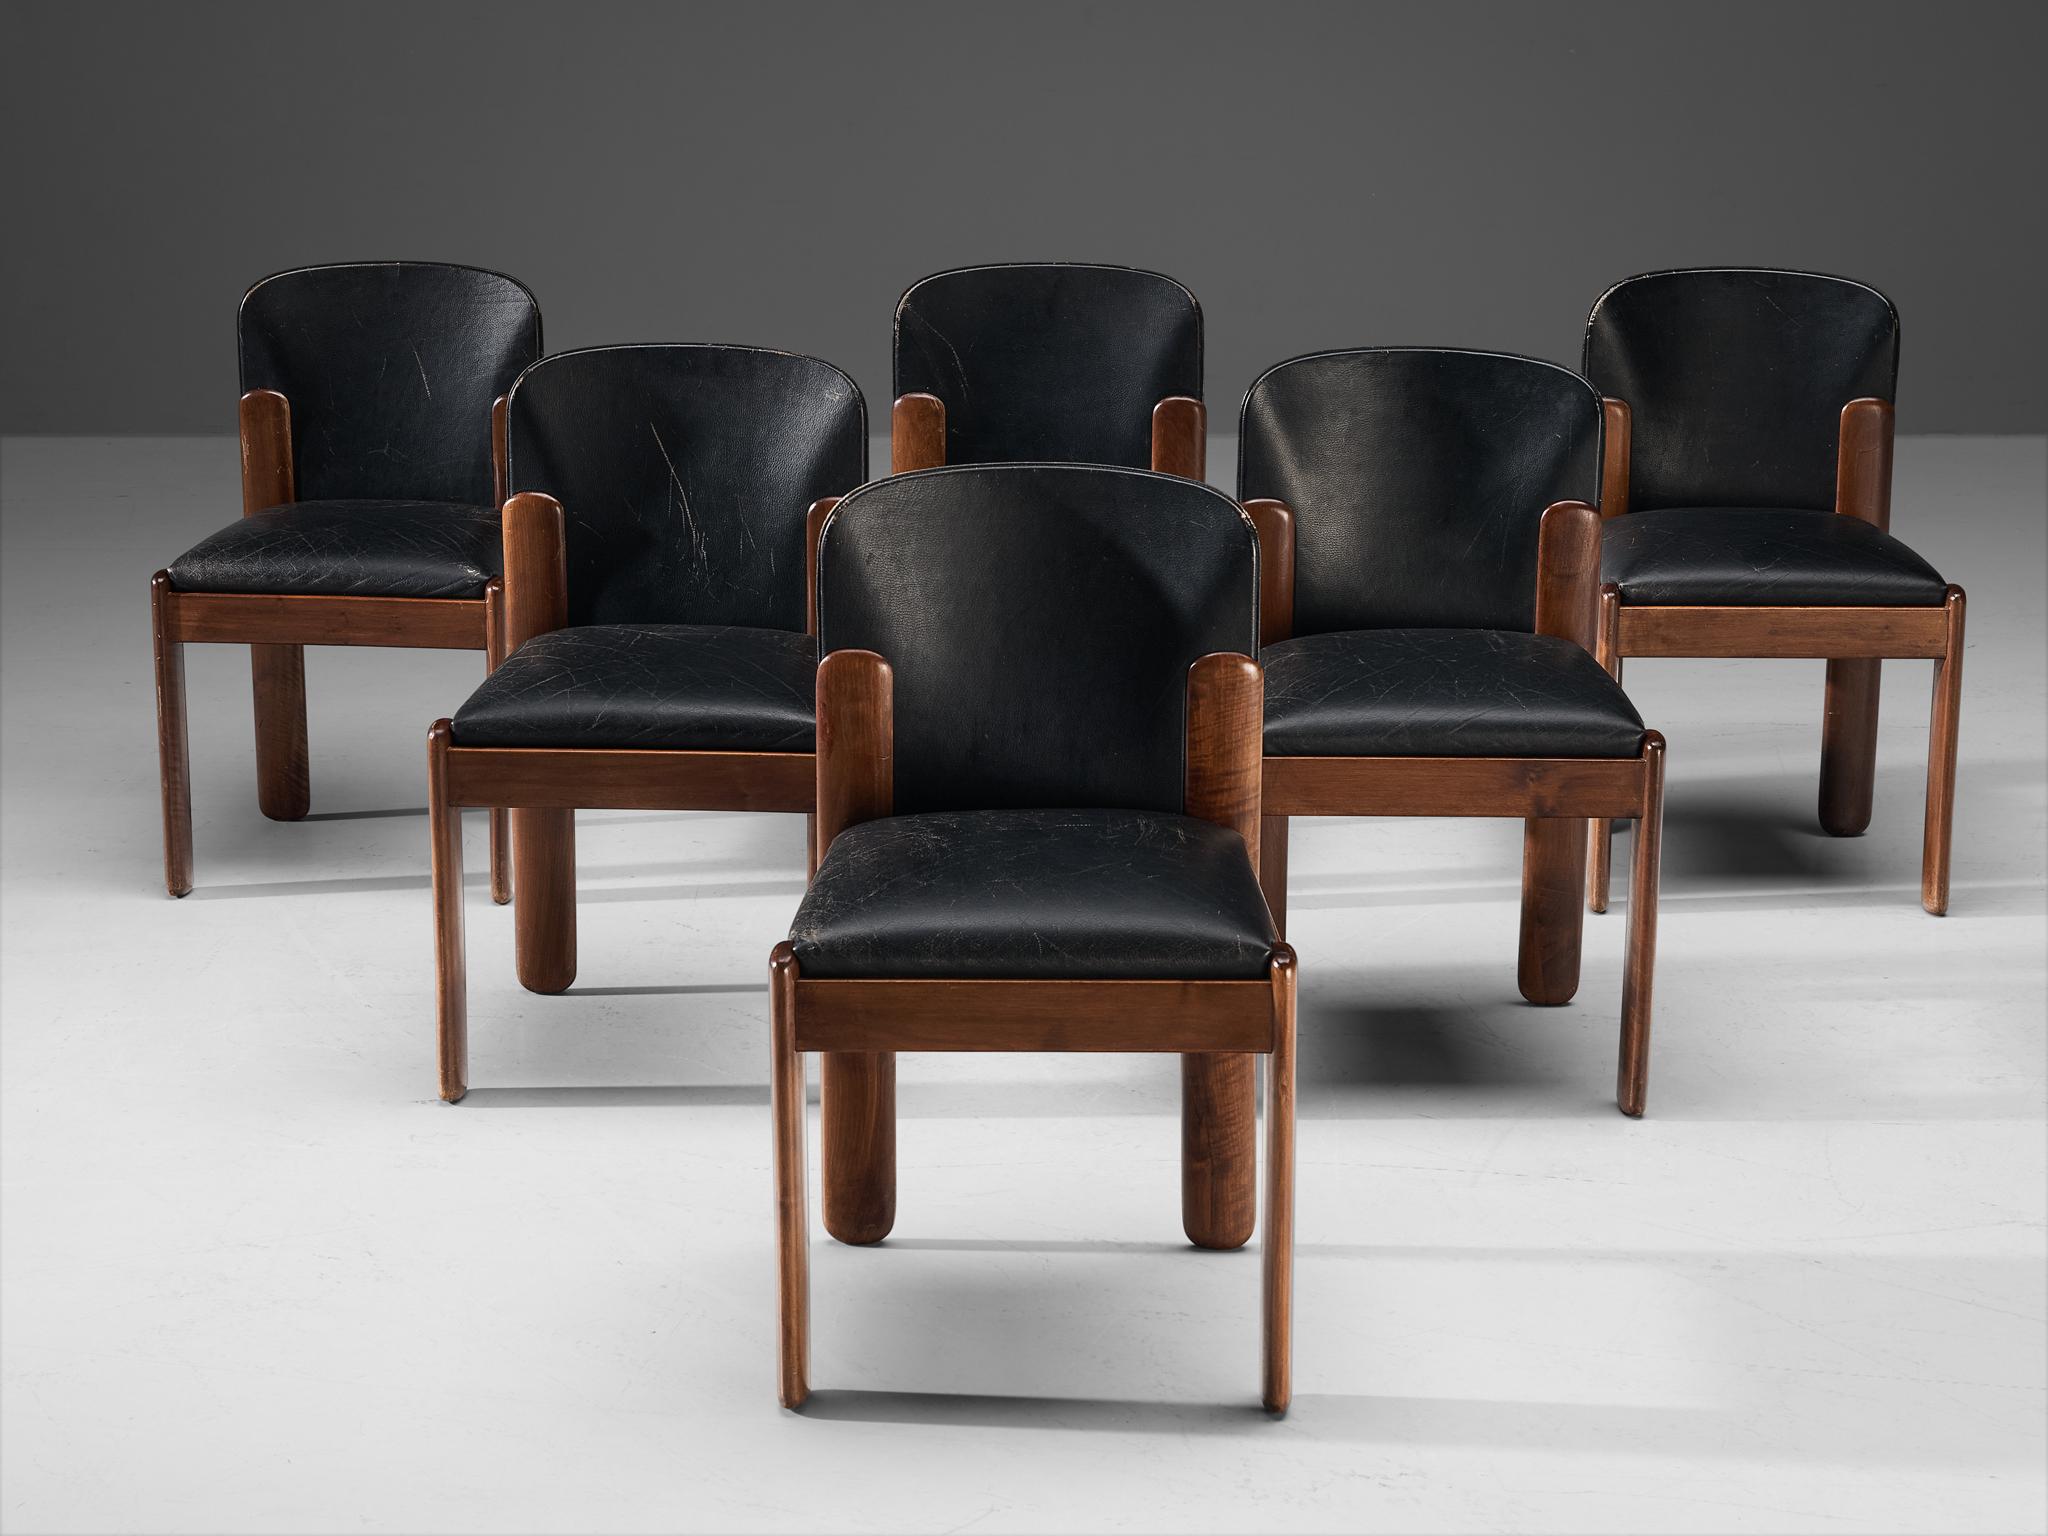 Silvio Coppola for Bernini, six dining chairs, model '330', black leather, stained walnut, Italy, 1960s

Wonderful set of six dining chairs by Italian designer Silvio Coppola. These aesthetically well balanced chairs strongly convince with the